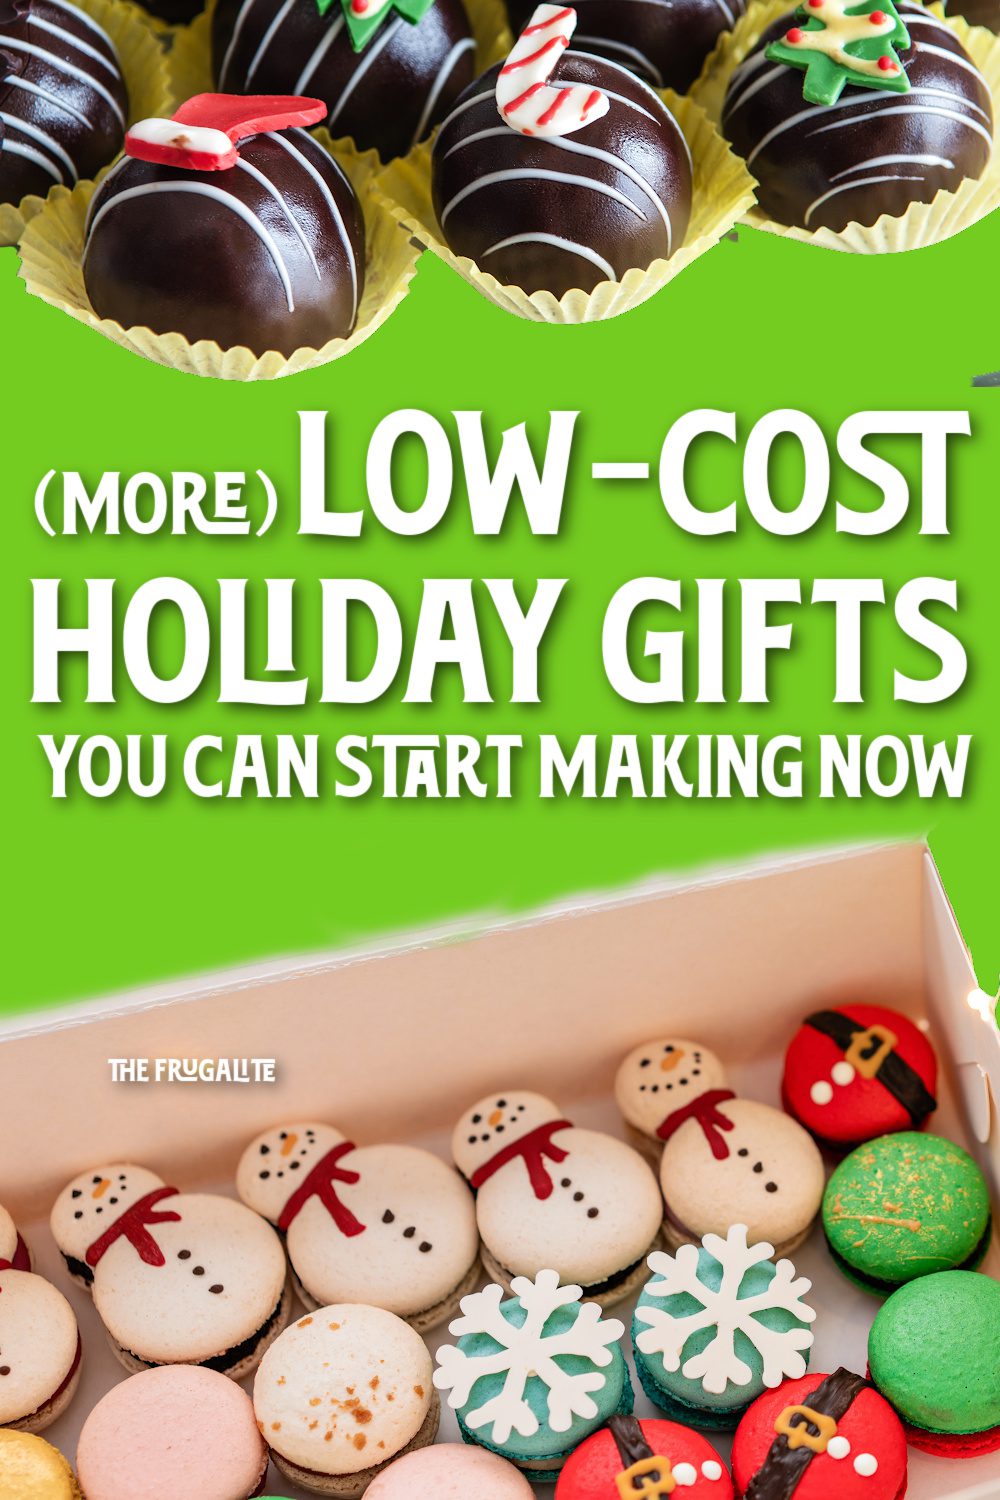 (More) Low-Cost Holiday Gifts You Can Start Making Now